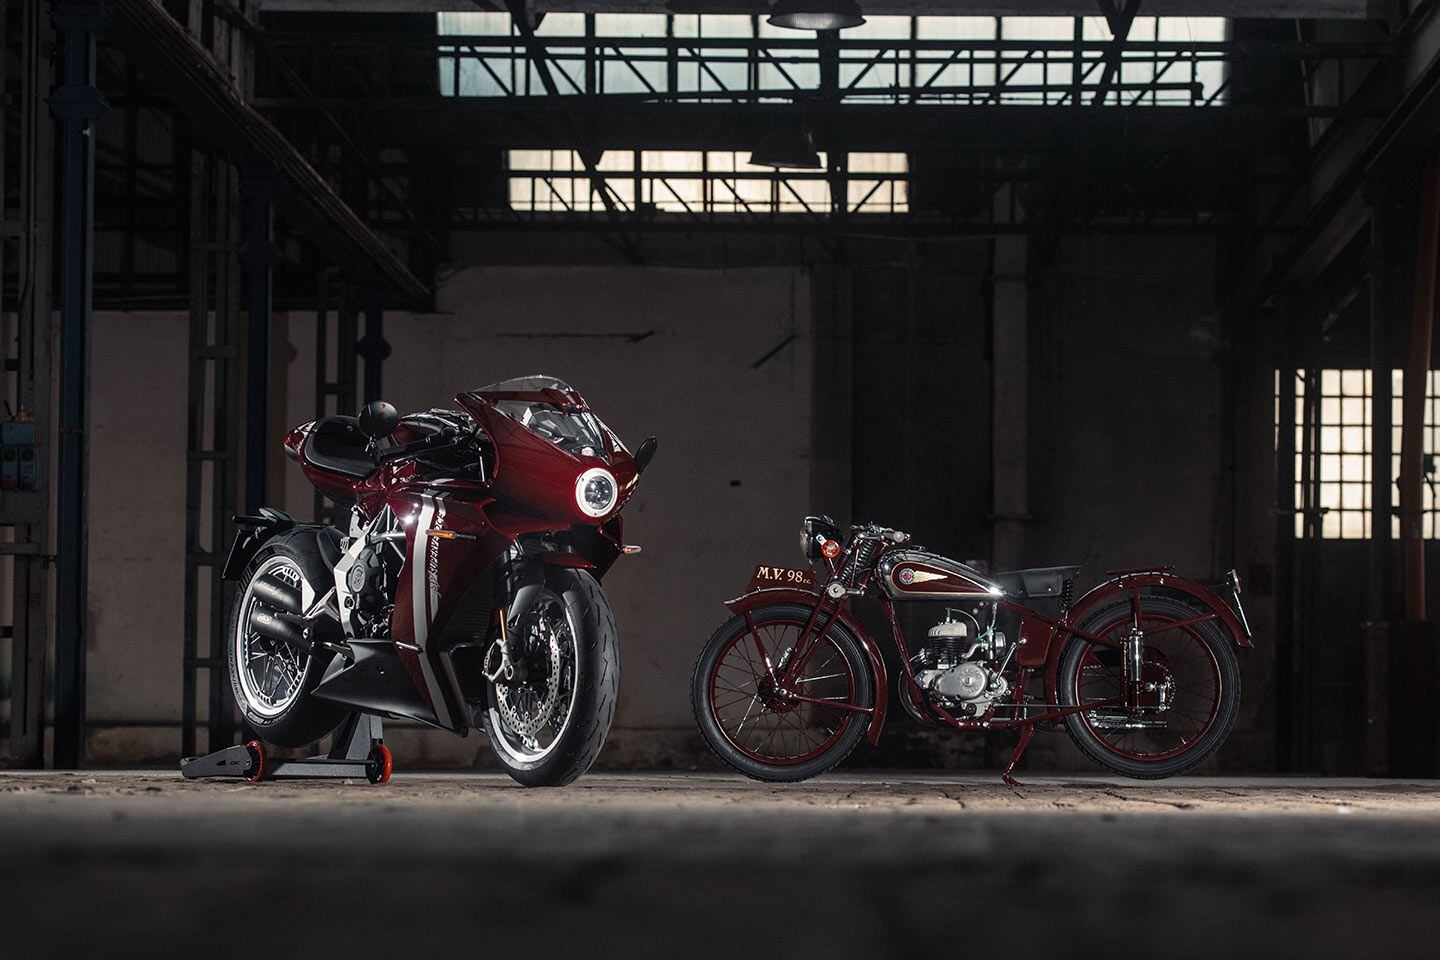 There’s no denying that MV Agusta’s motorcycles are some of the most beautiful to ever be put into production.